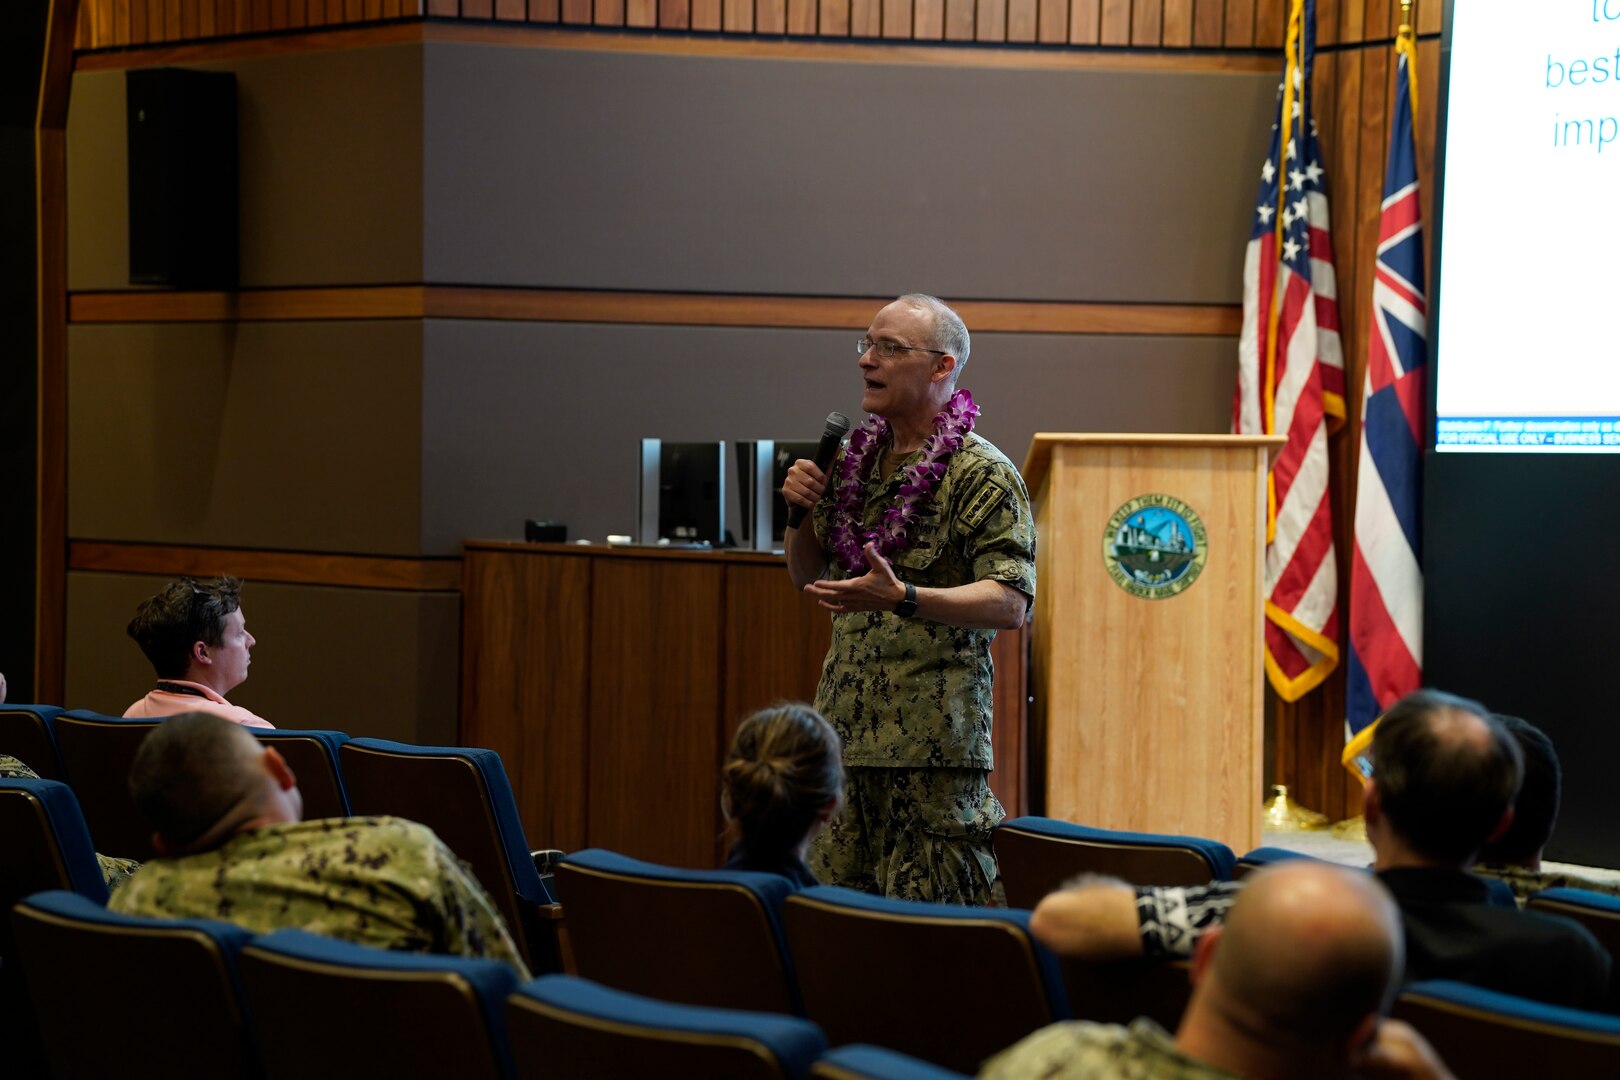 Rear Adm. William Greene stands at the front of an auditorium speaking to a room of Sailors and civilians.